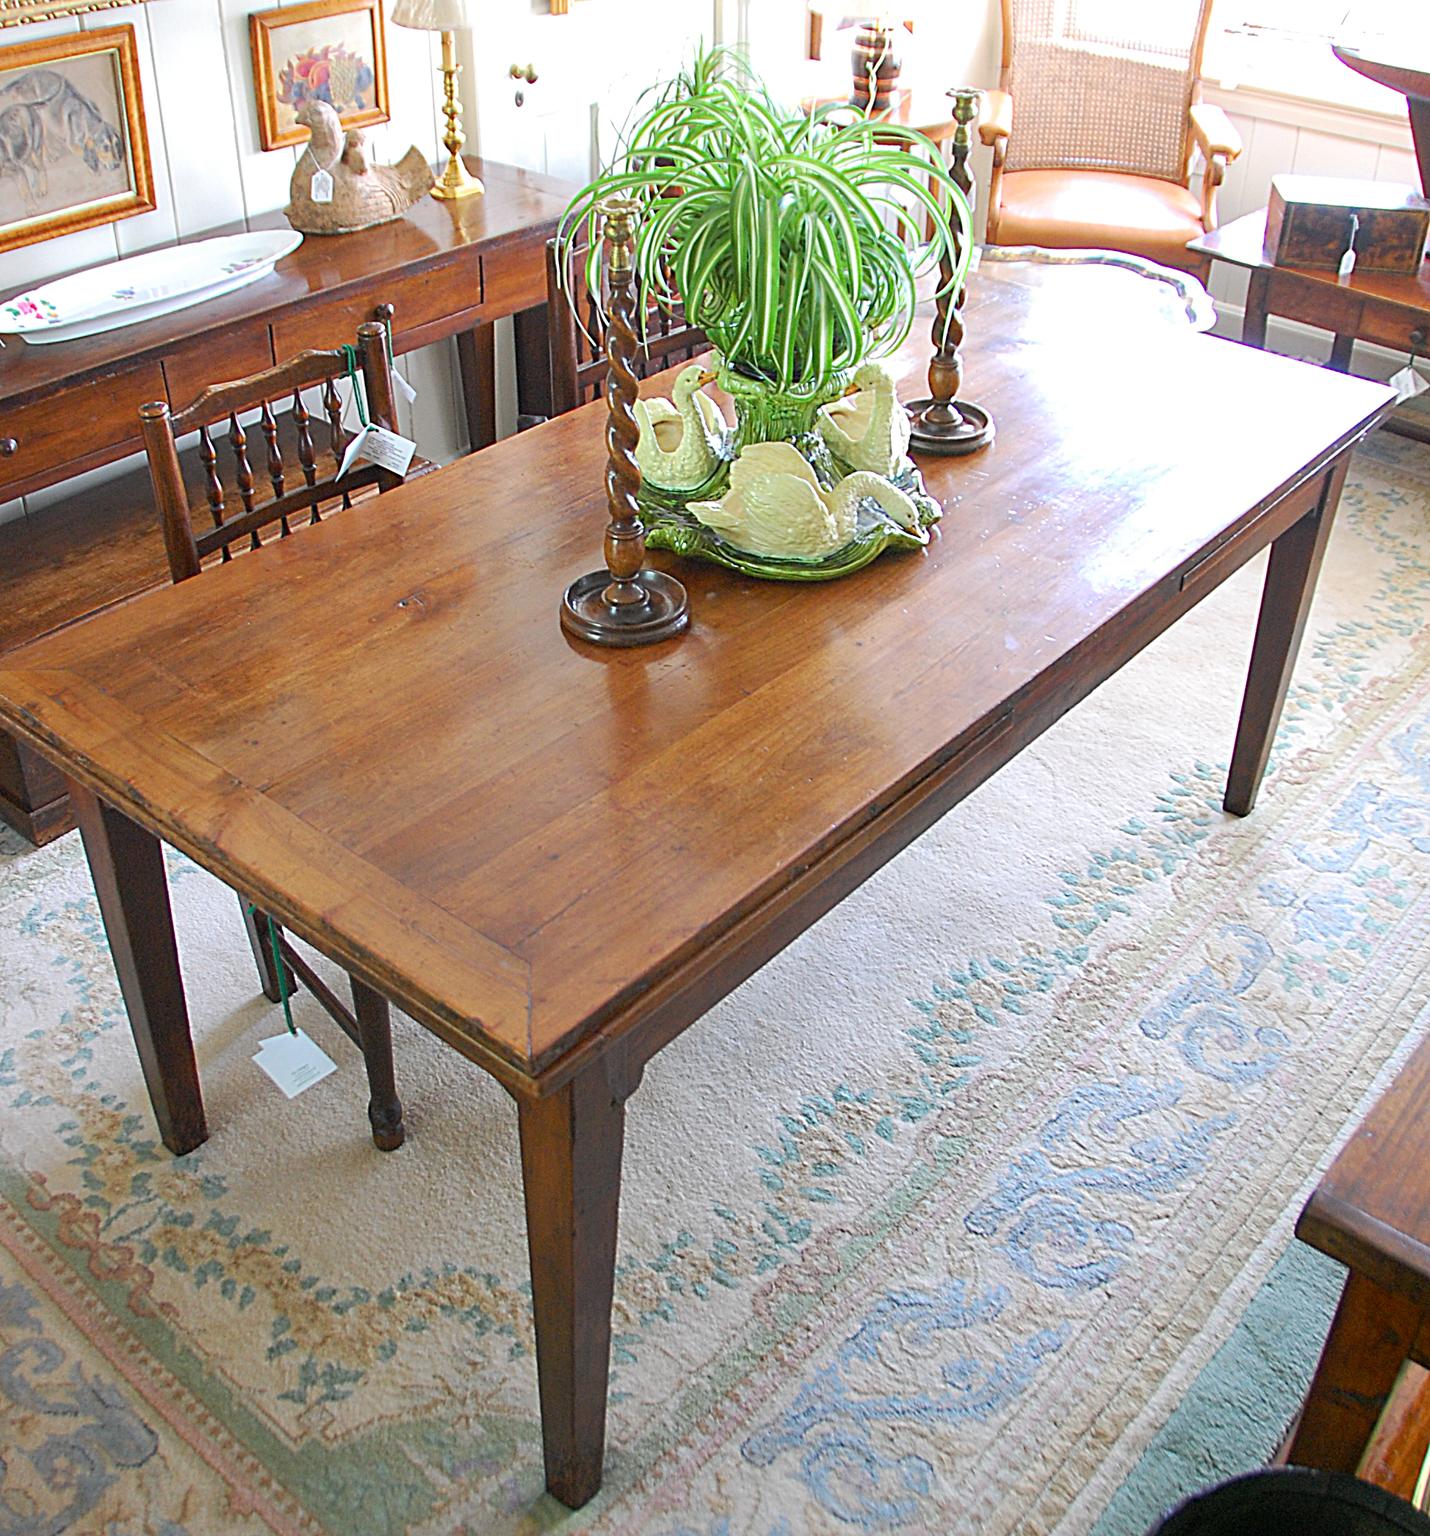 French provincial mid-19th century cherry and chestnut farmhouse extending table with square tapered legs and two drawers. This substantial six foot by 34 1/2 inch extending table has a solid cherry top and frame, the extending leaves are of cherry